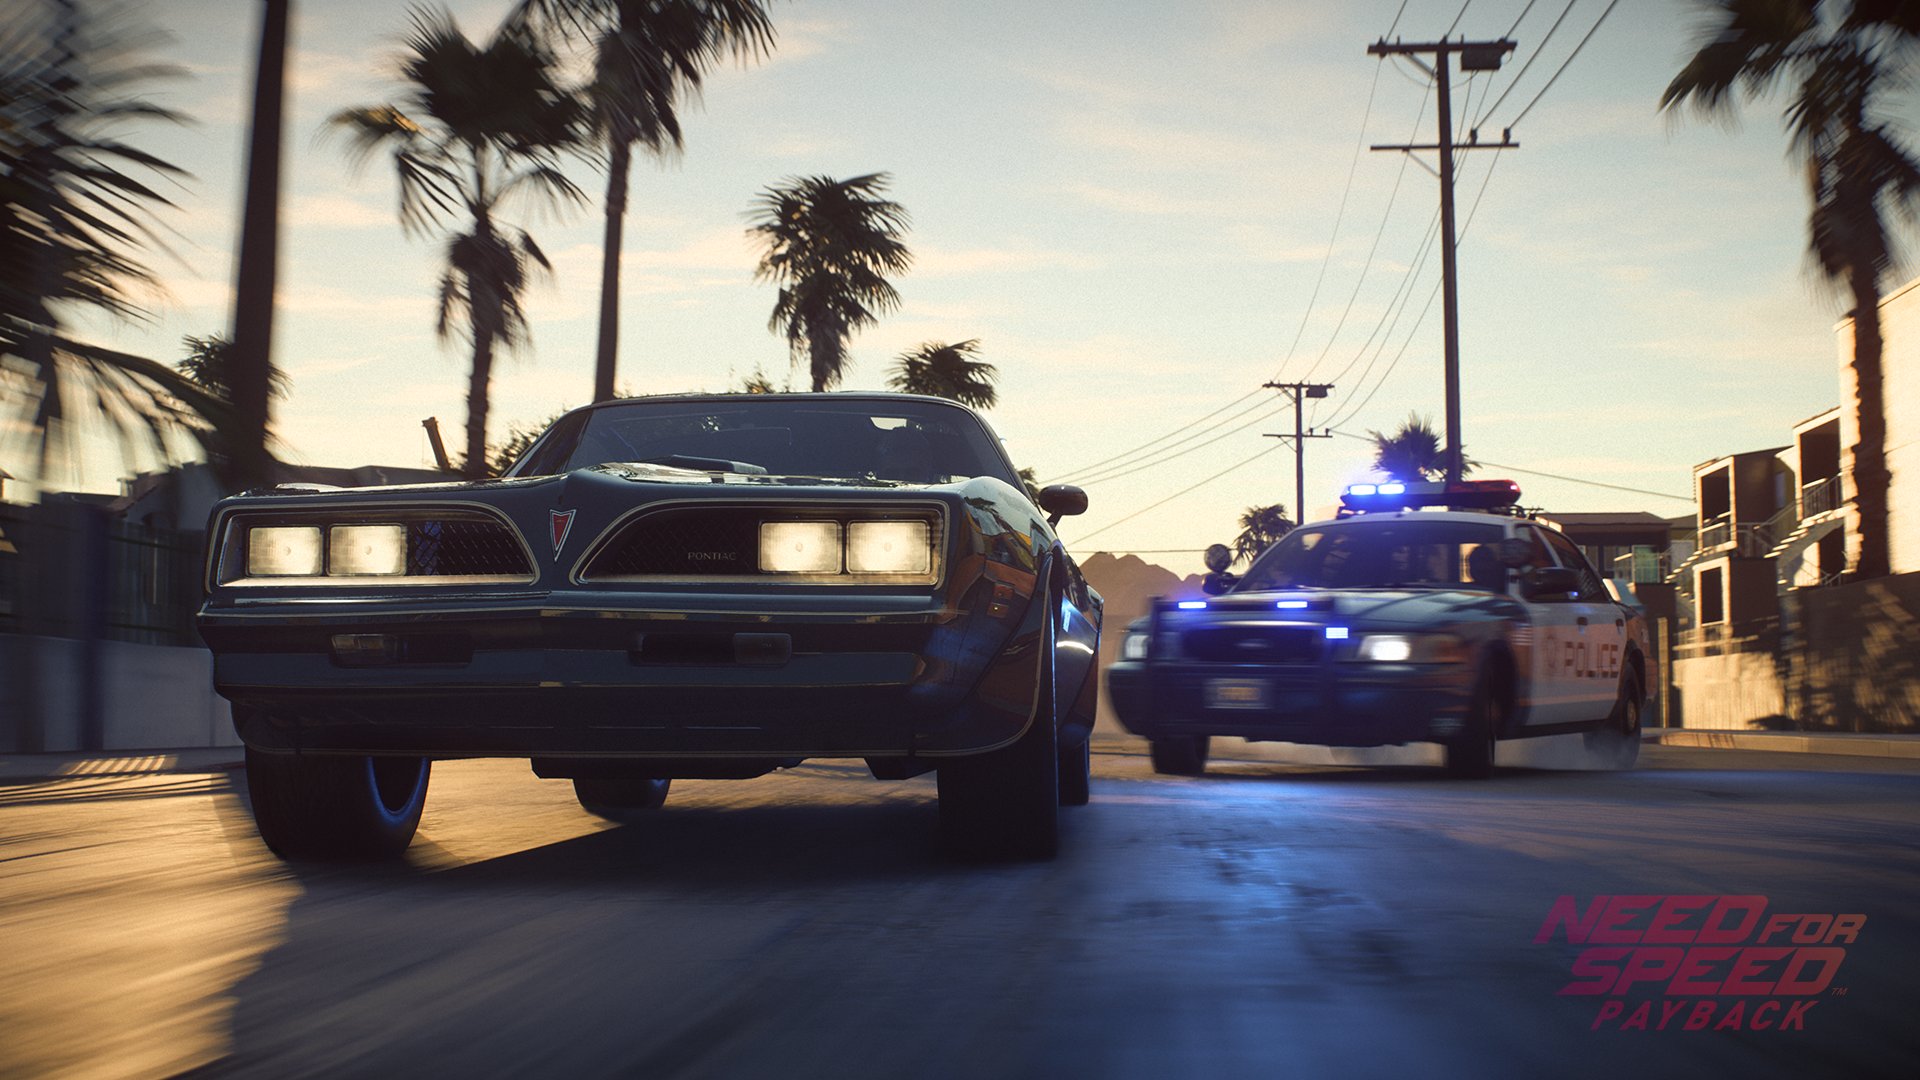 Need for Speed Payback Adds Two New Cars, Free-Roam Cops, AllDrive